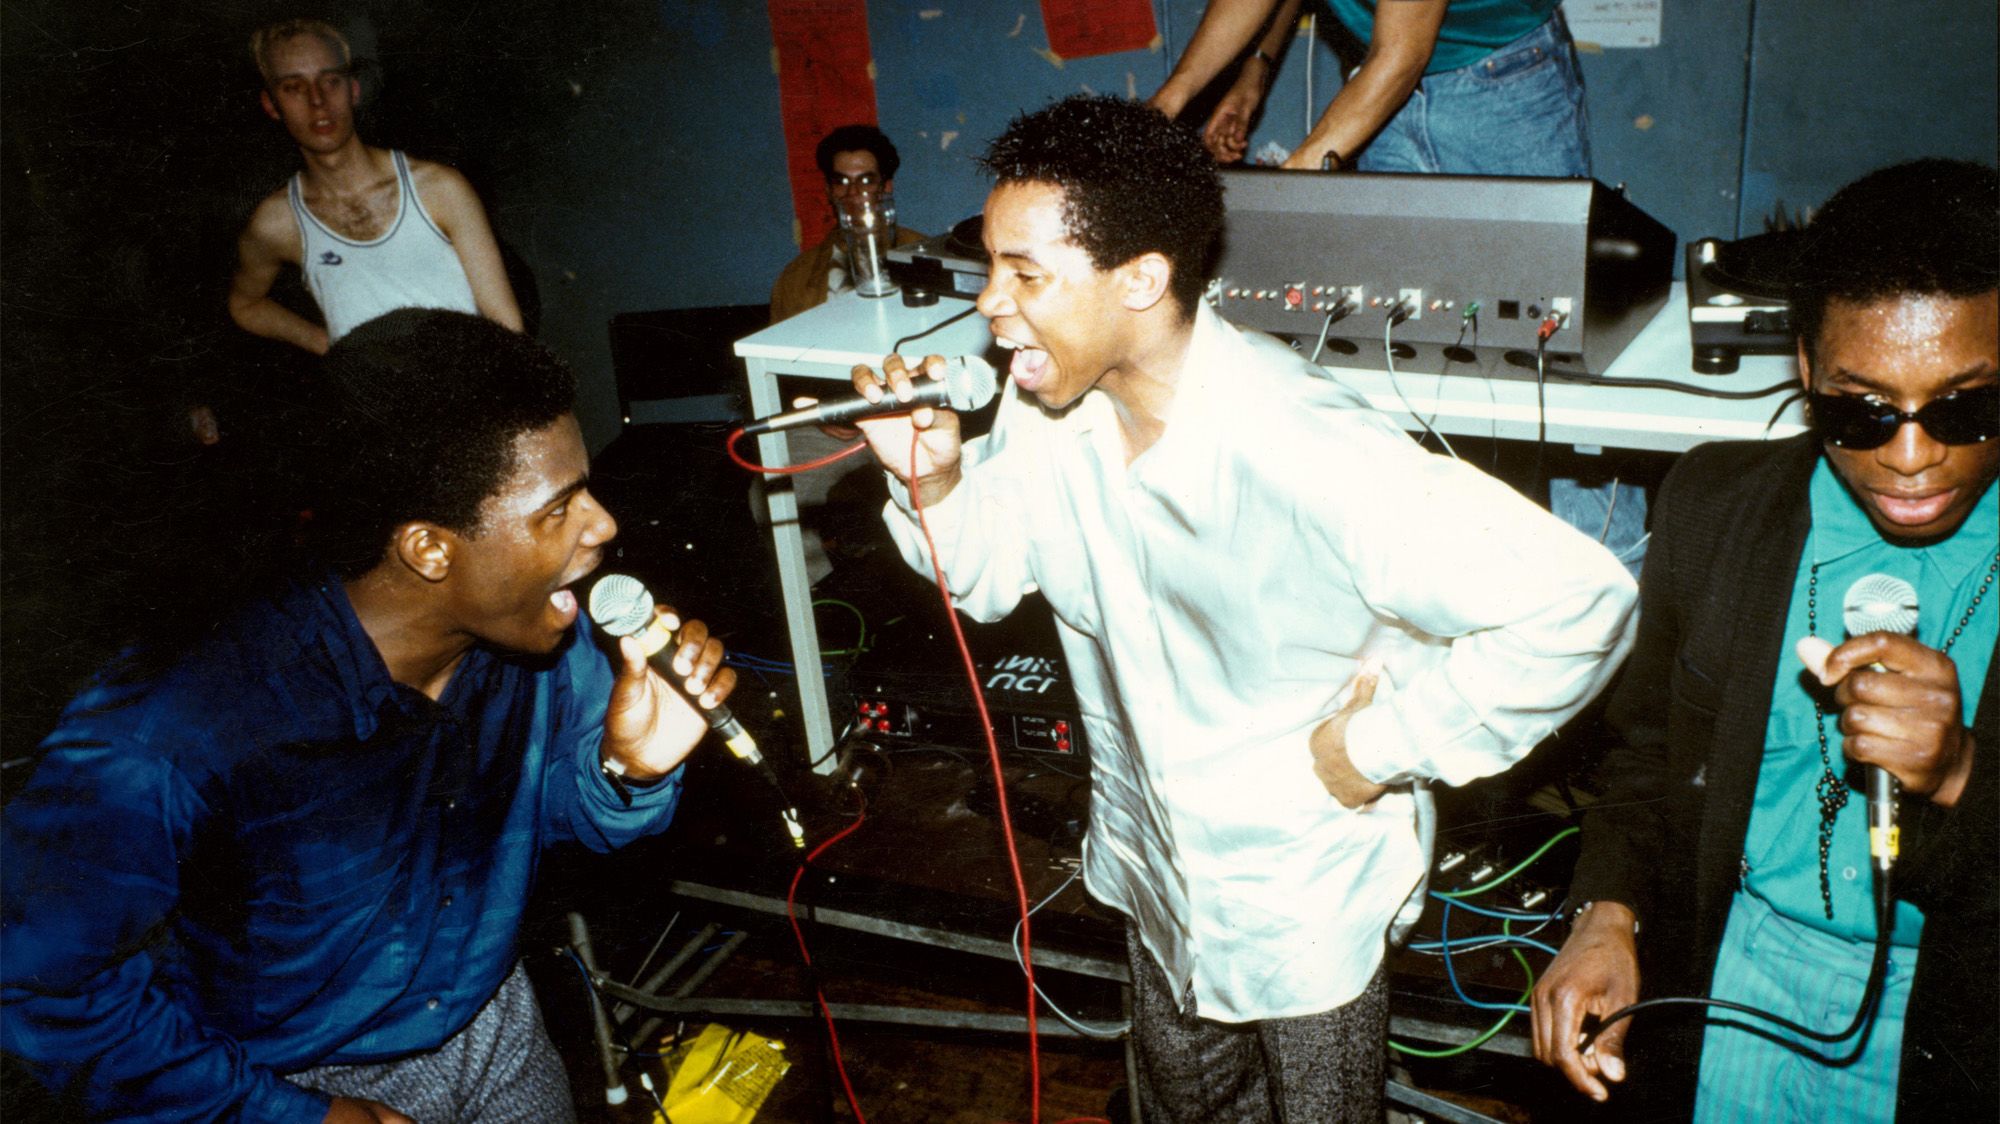 Three people standing together as a group singing into microphones in a club setting